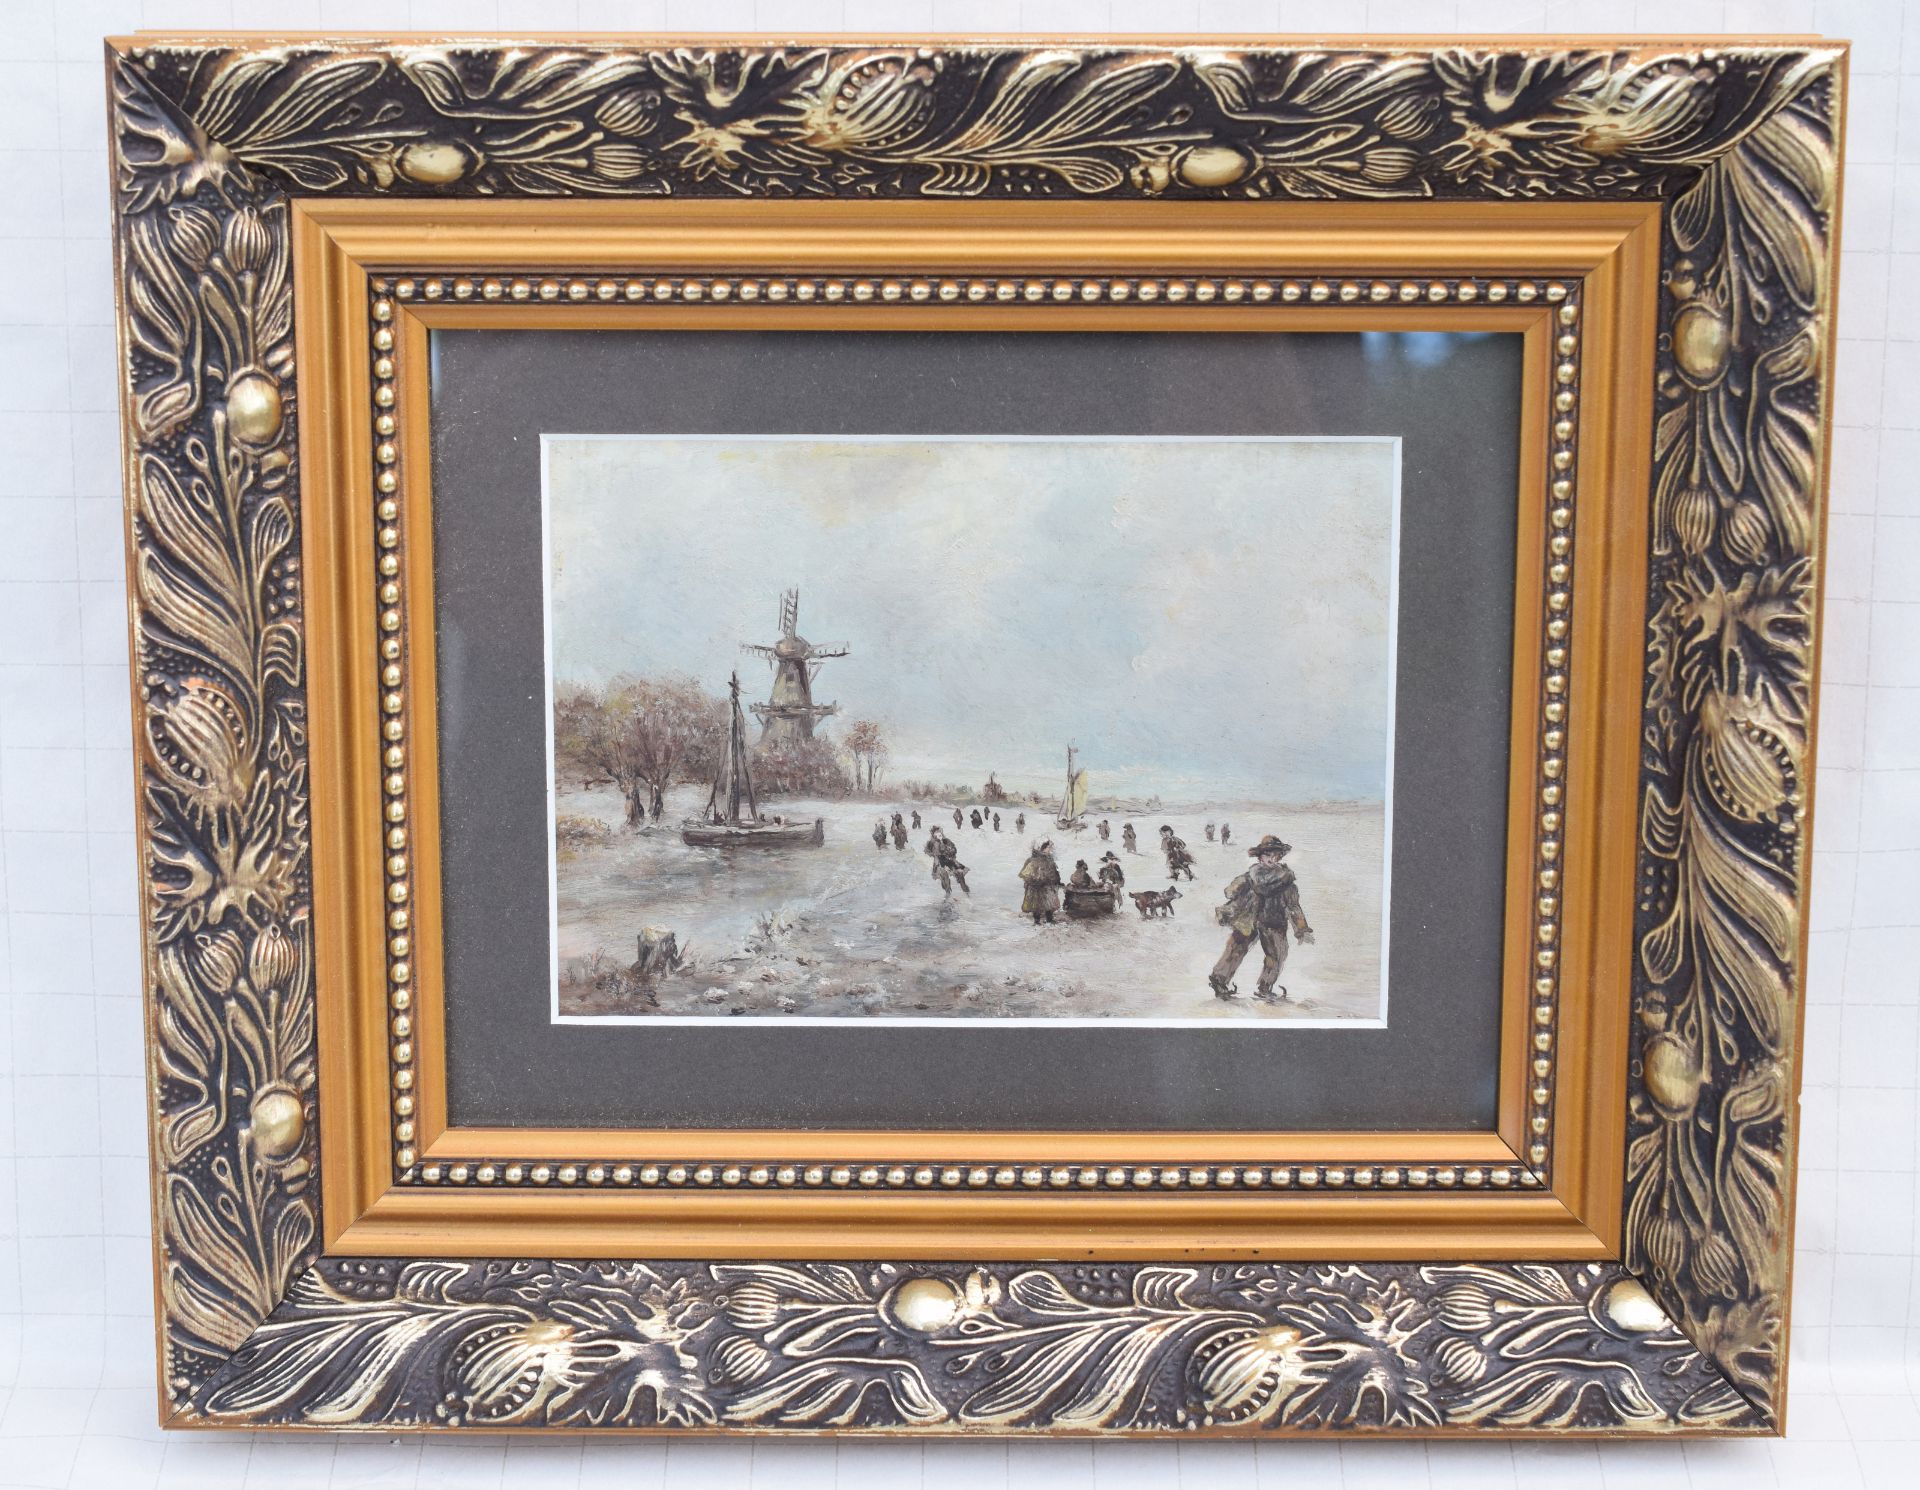 Vintage Dutch Oil Painting Of Skaters On Frozen Lake - Image 3 of 6